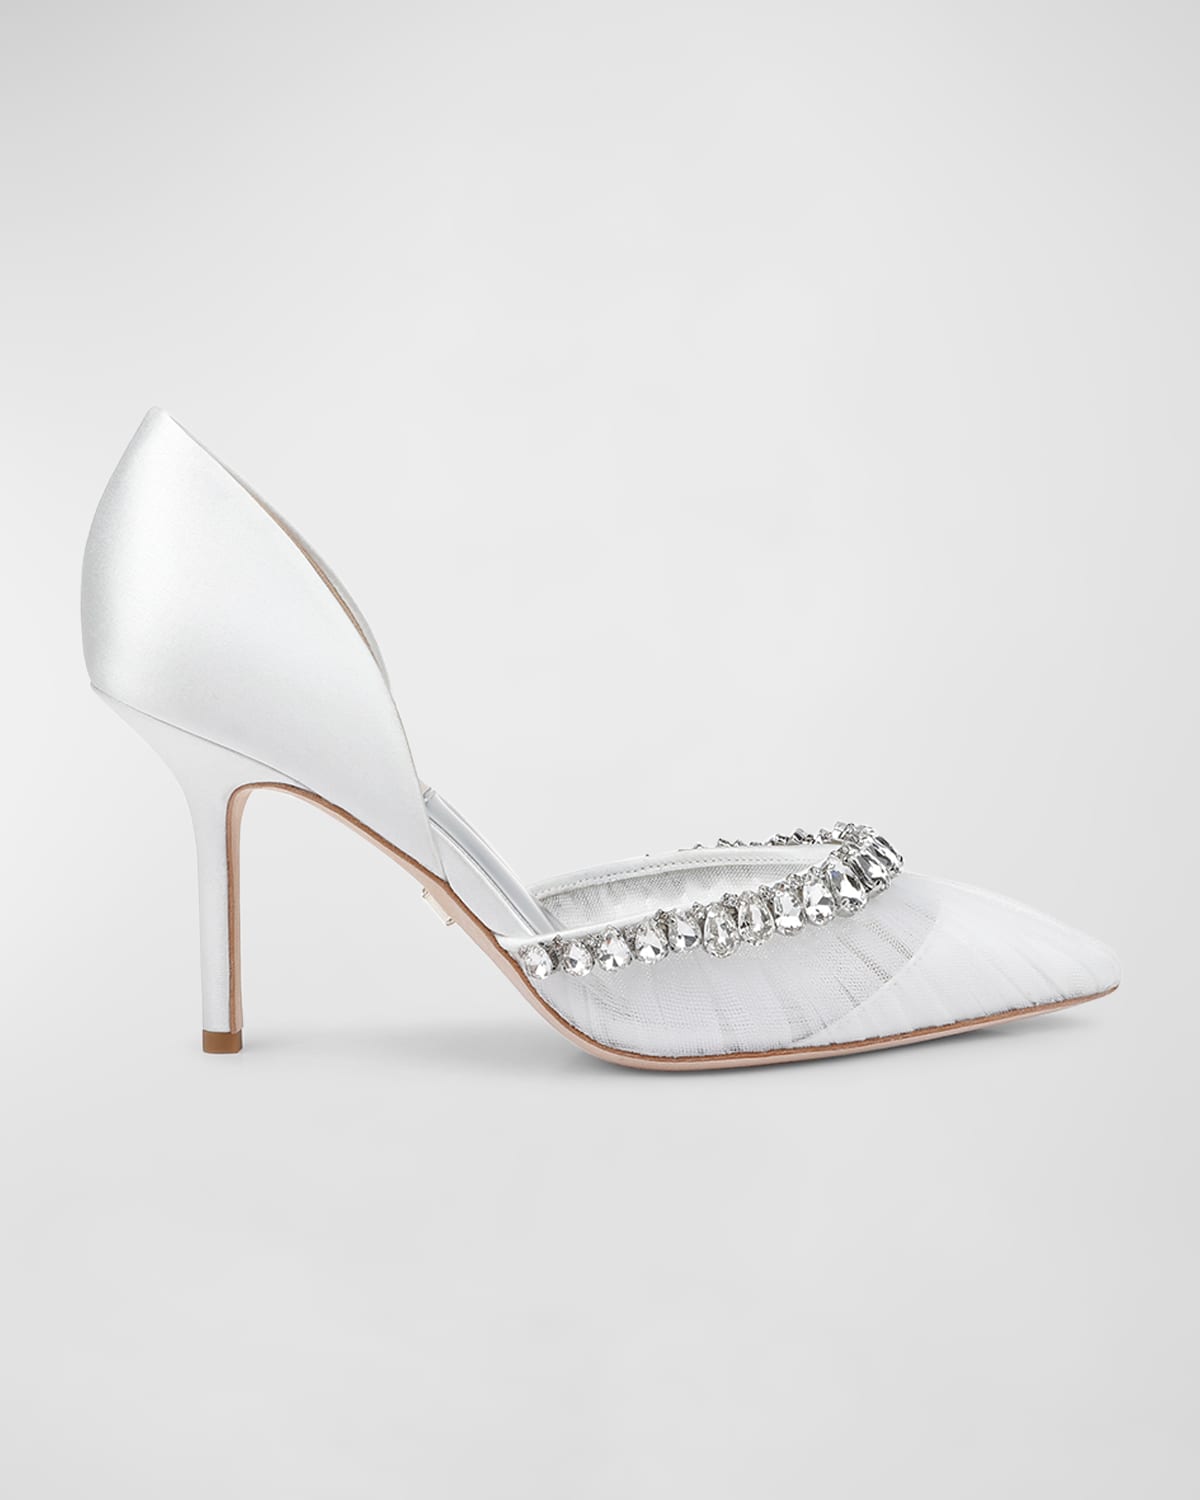 BADGLEY MISCHKA EVERLEY CRYSTAL TULLE COCKTAIL PUMPS